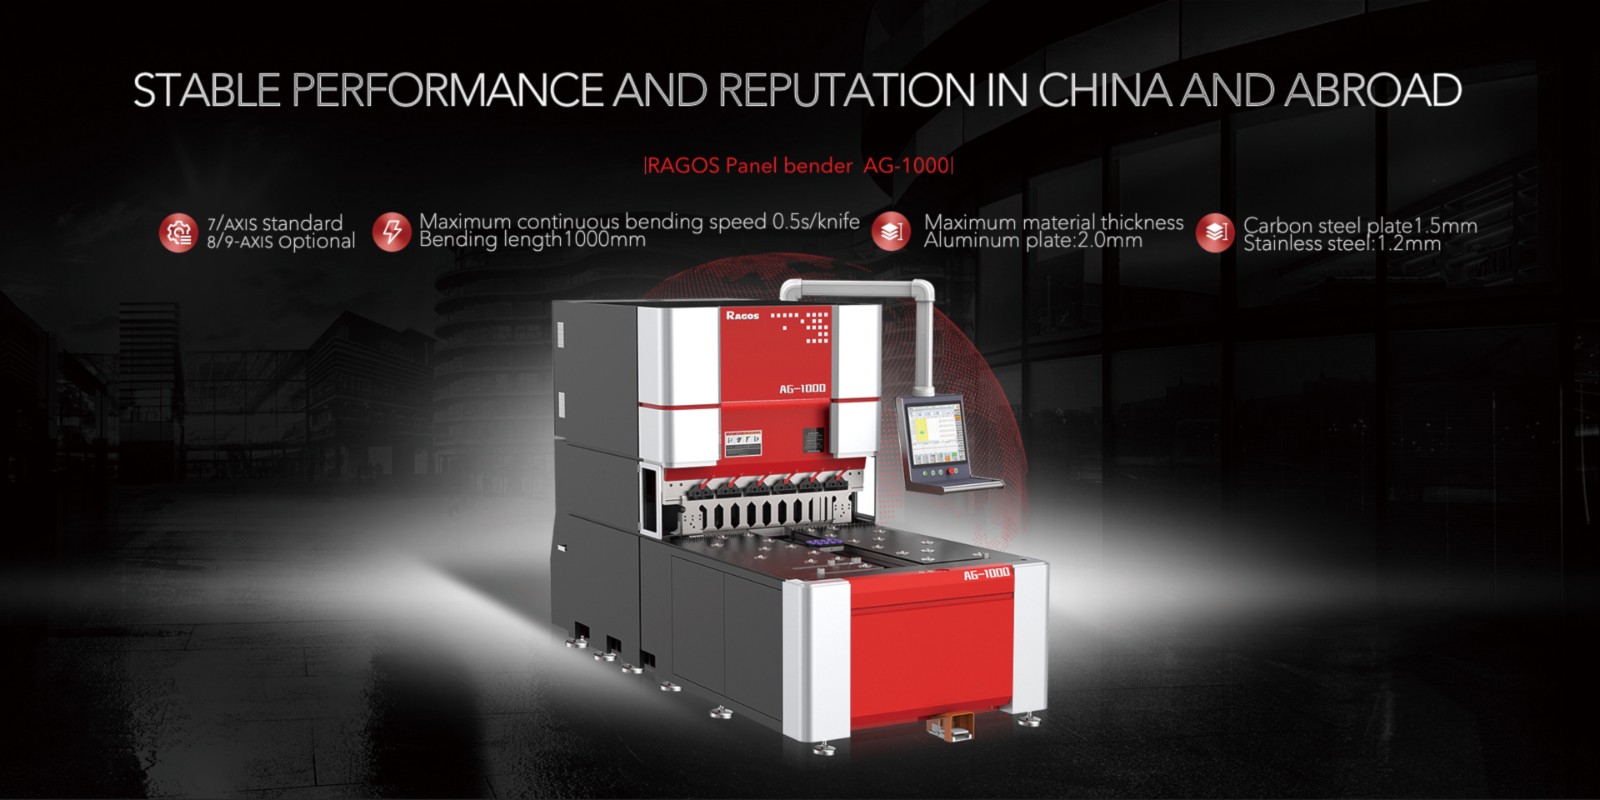 ragos AG1000 model panel bender product details page parameters